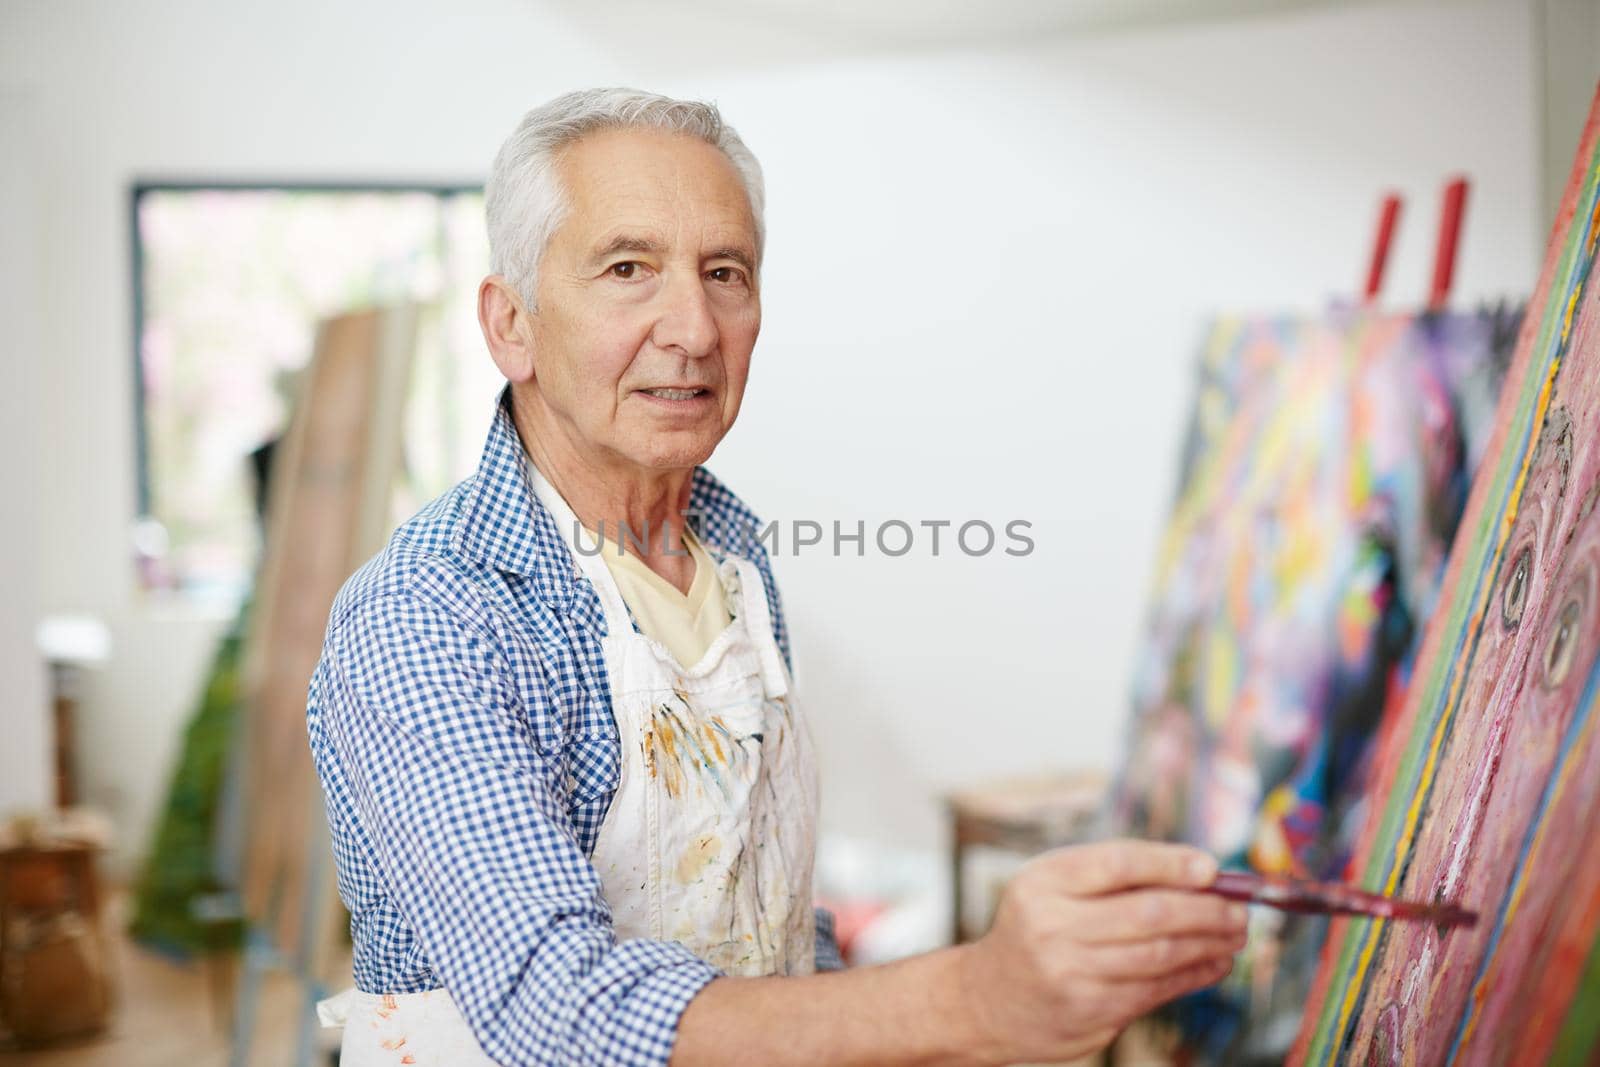 Shot of a senior man working on a painting at home.